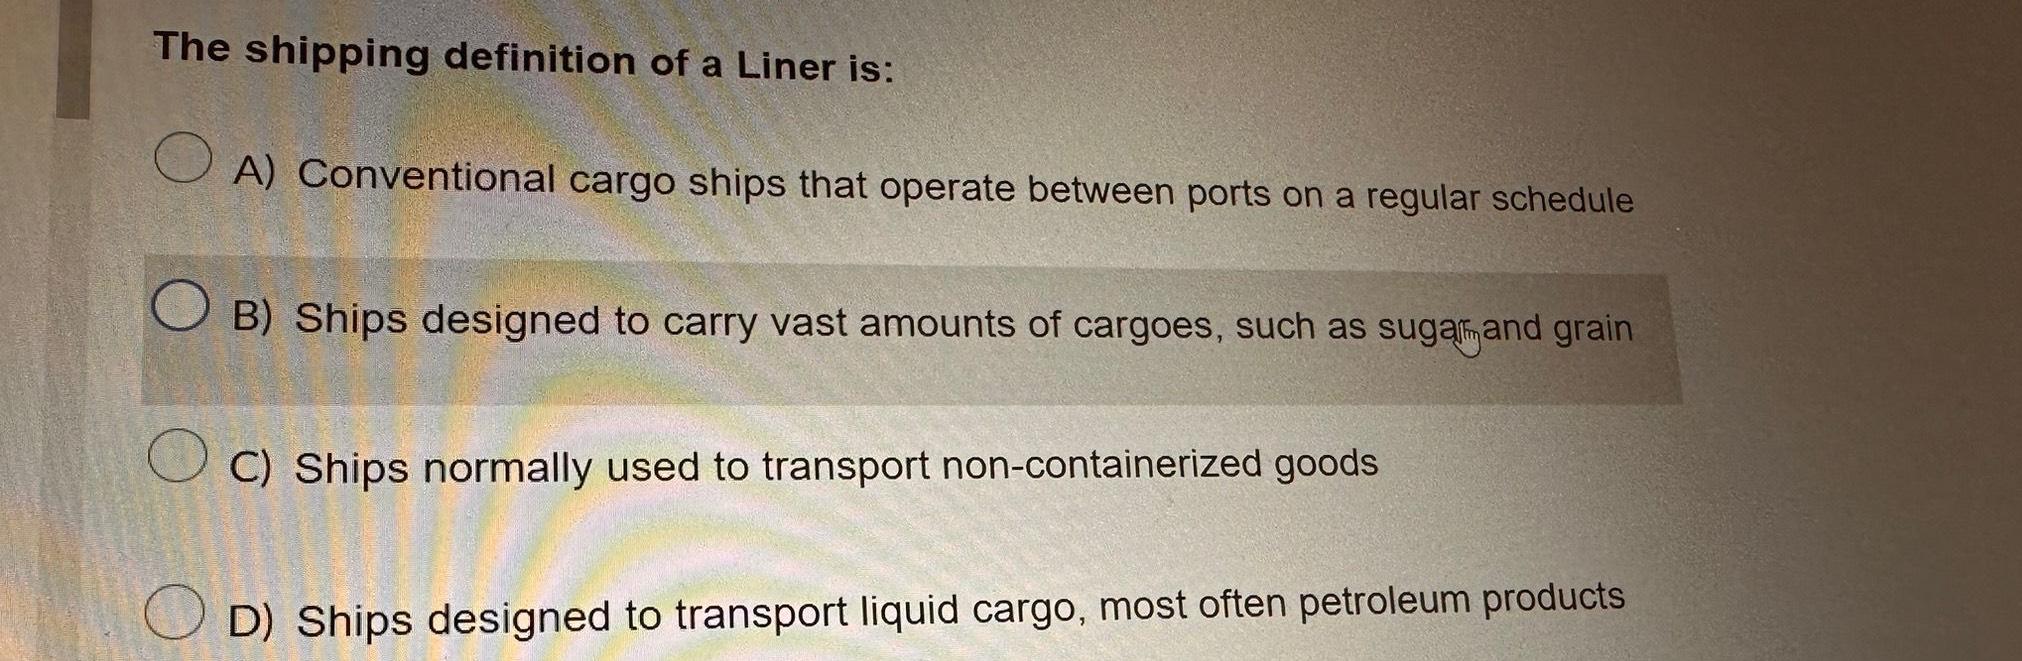 The shipping definition of a Liner is: OA) Conventional cargo ships that operate between ports on a regular